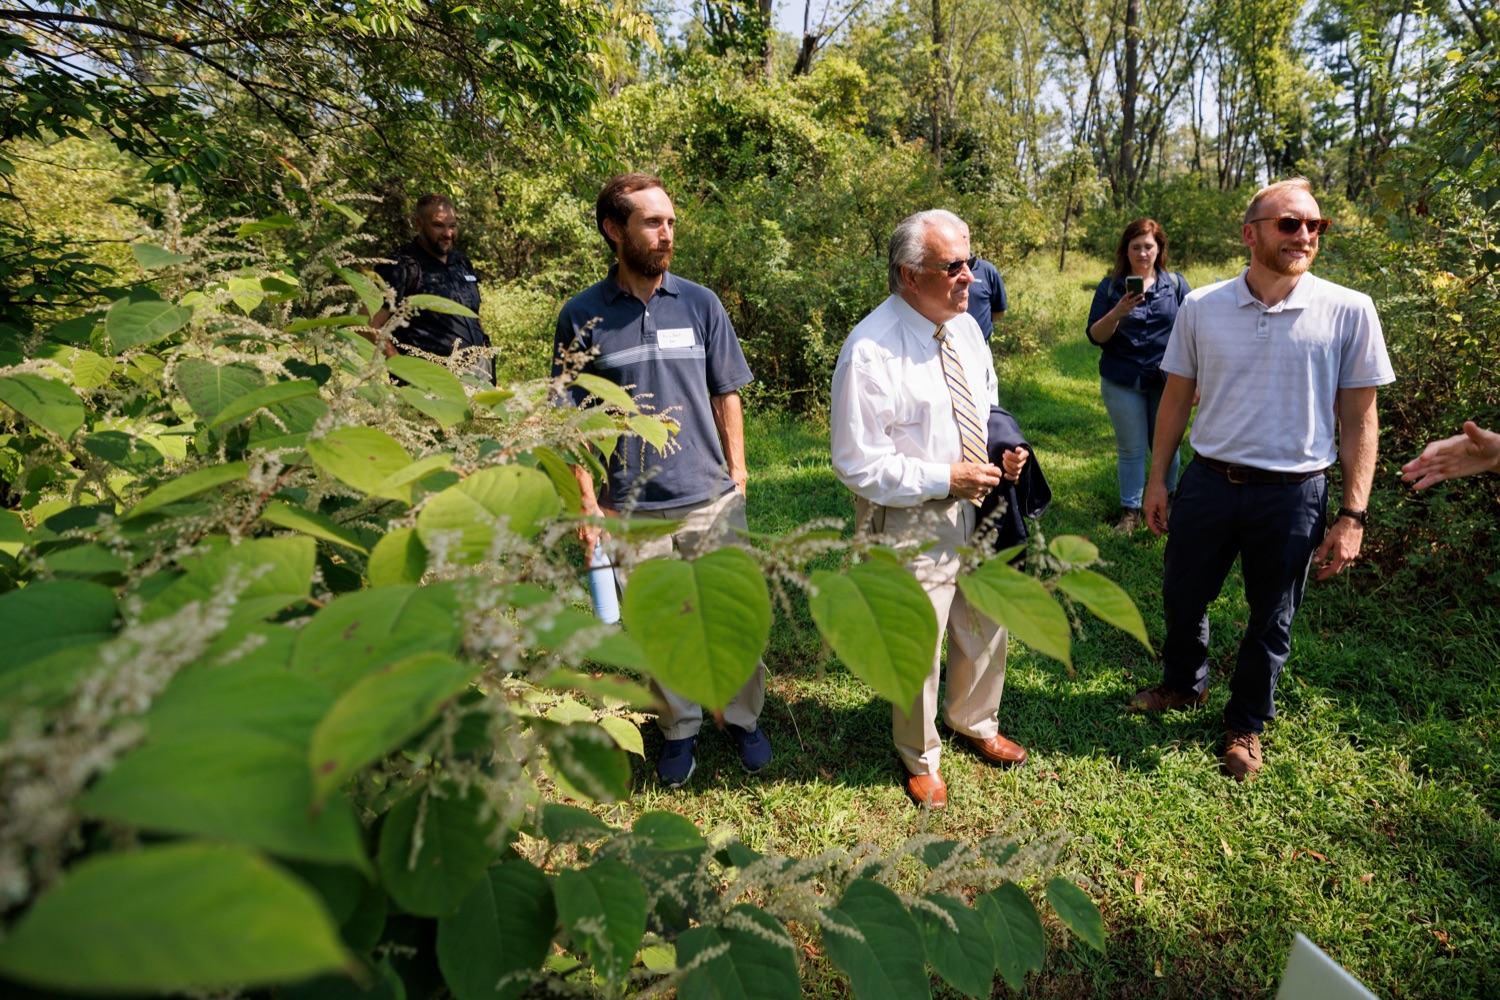 From left; Governors Invasive Species Council Coordinator Kris Abell; House Agriculture and Rural Affairs Committee co-chair Eddie Day Pashinski; and Hardwoods Development Councils Jon Geyer stand in front of Invasive Japanese knotweed (Fallopia japonica) at Ambler Field Station where Temple University is conducting invasive species research and management on Friday, September 8, 2023.<br><a href="https://filesource.amperwave.net/commonwealthofpa/photo/23666_AGRIC_Invasive_Species_NK_011.JPG" target="_blank">⇣ Download Photo</a>